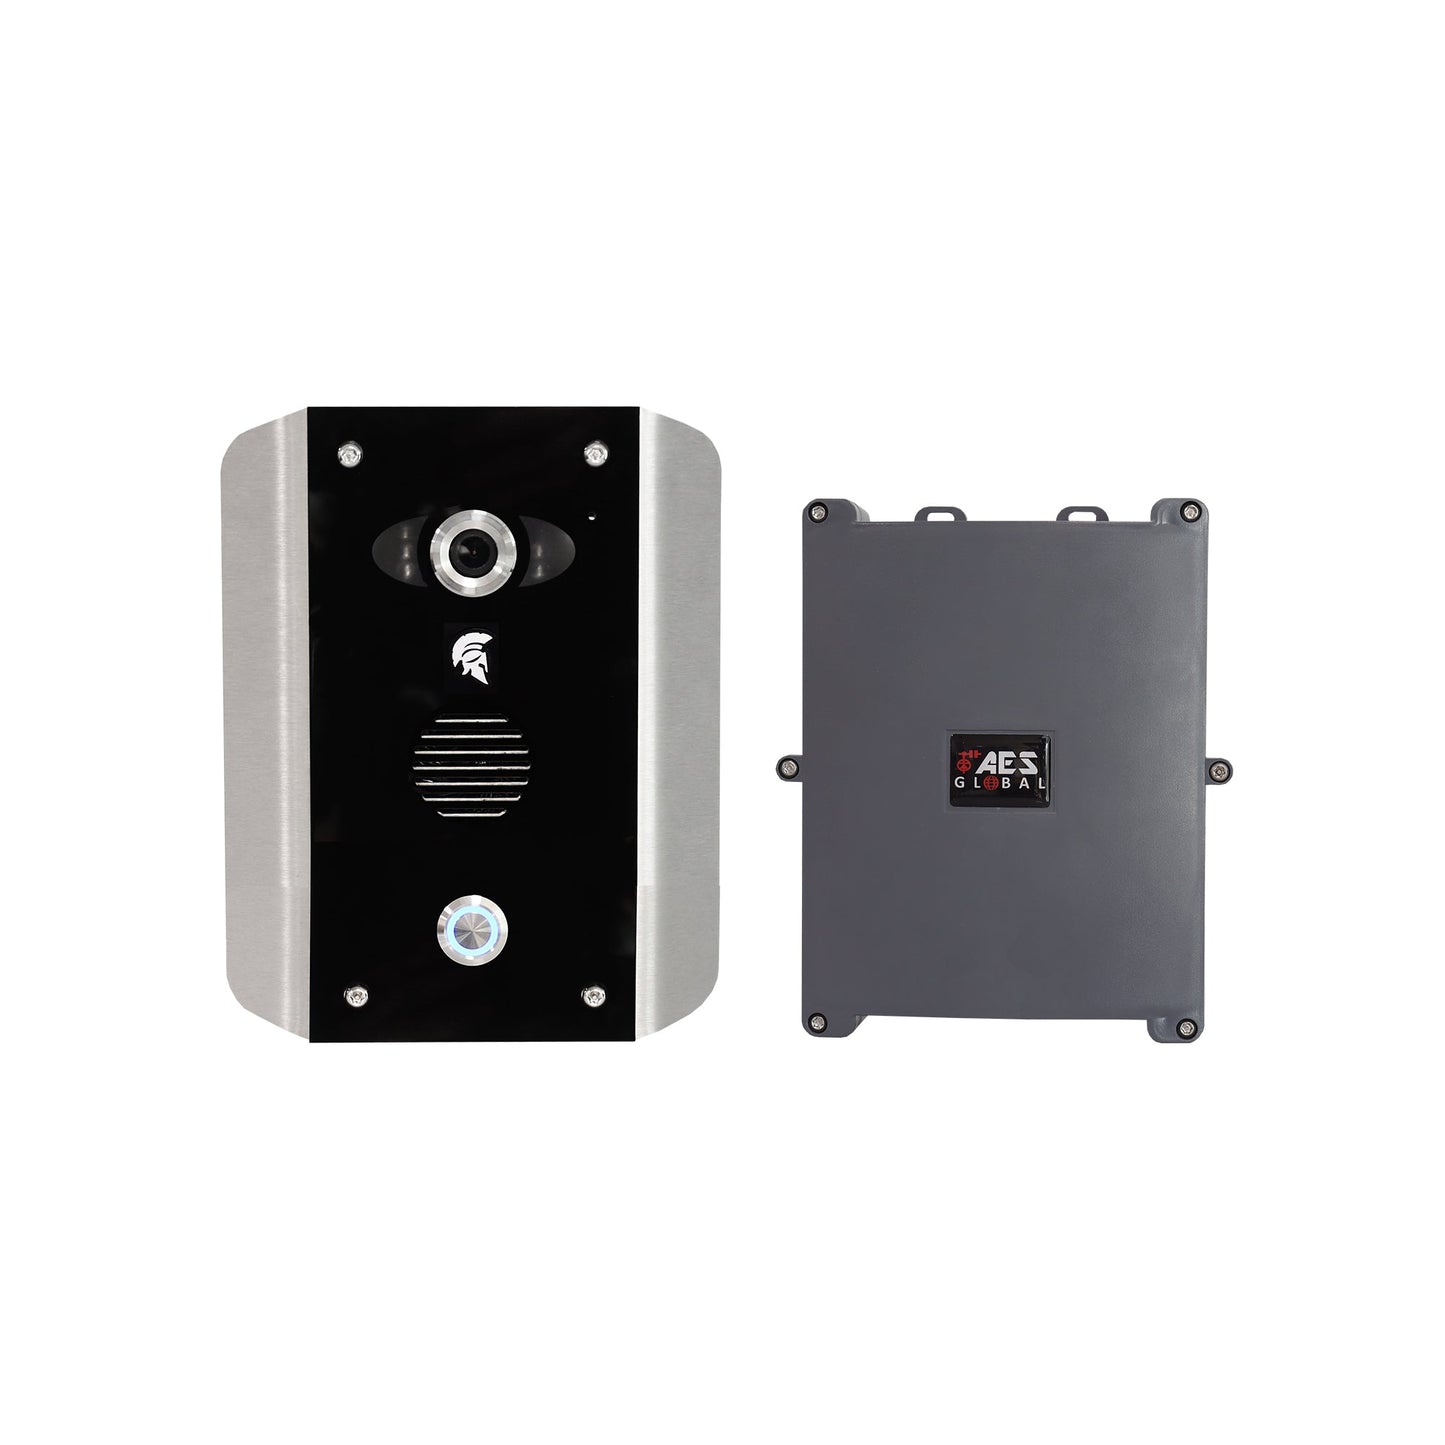 AES: Cellular Video in Architectural Black - ASD Trade Direct